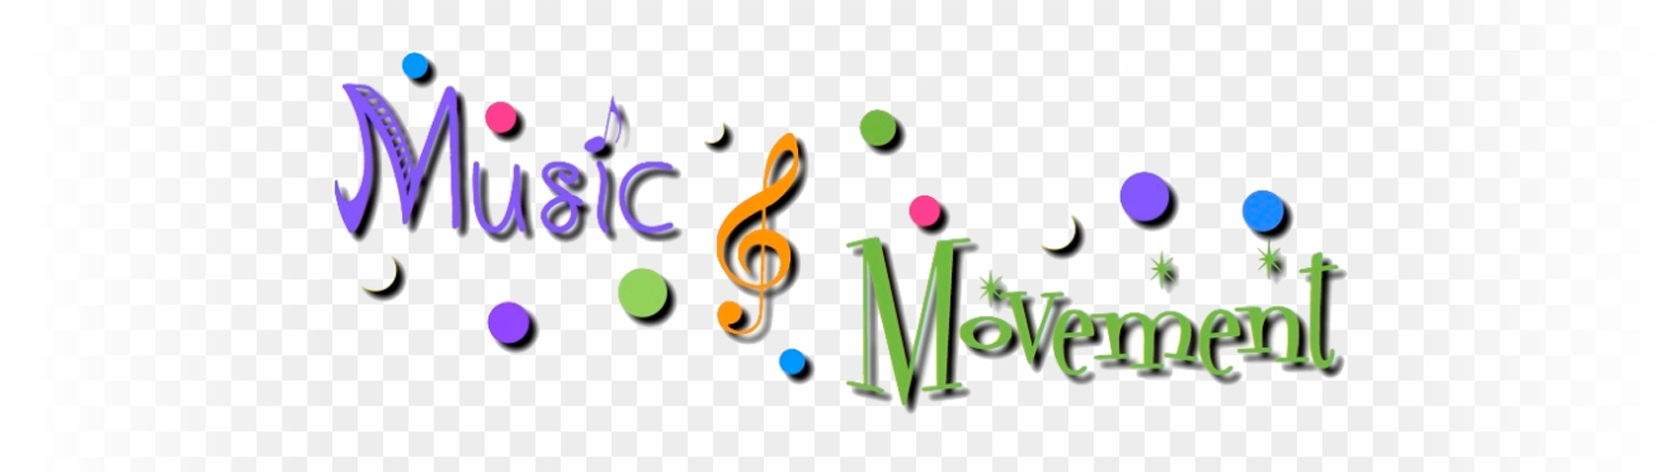 MOVE TO MUSIC